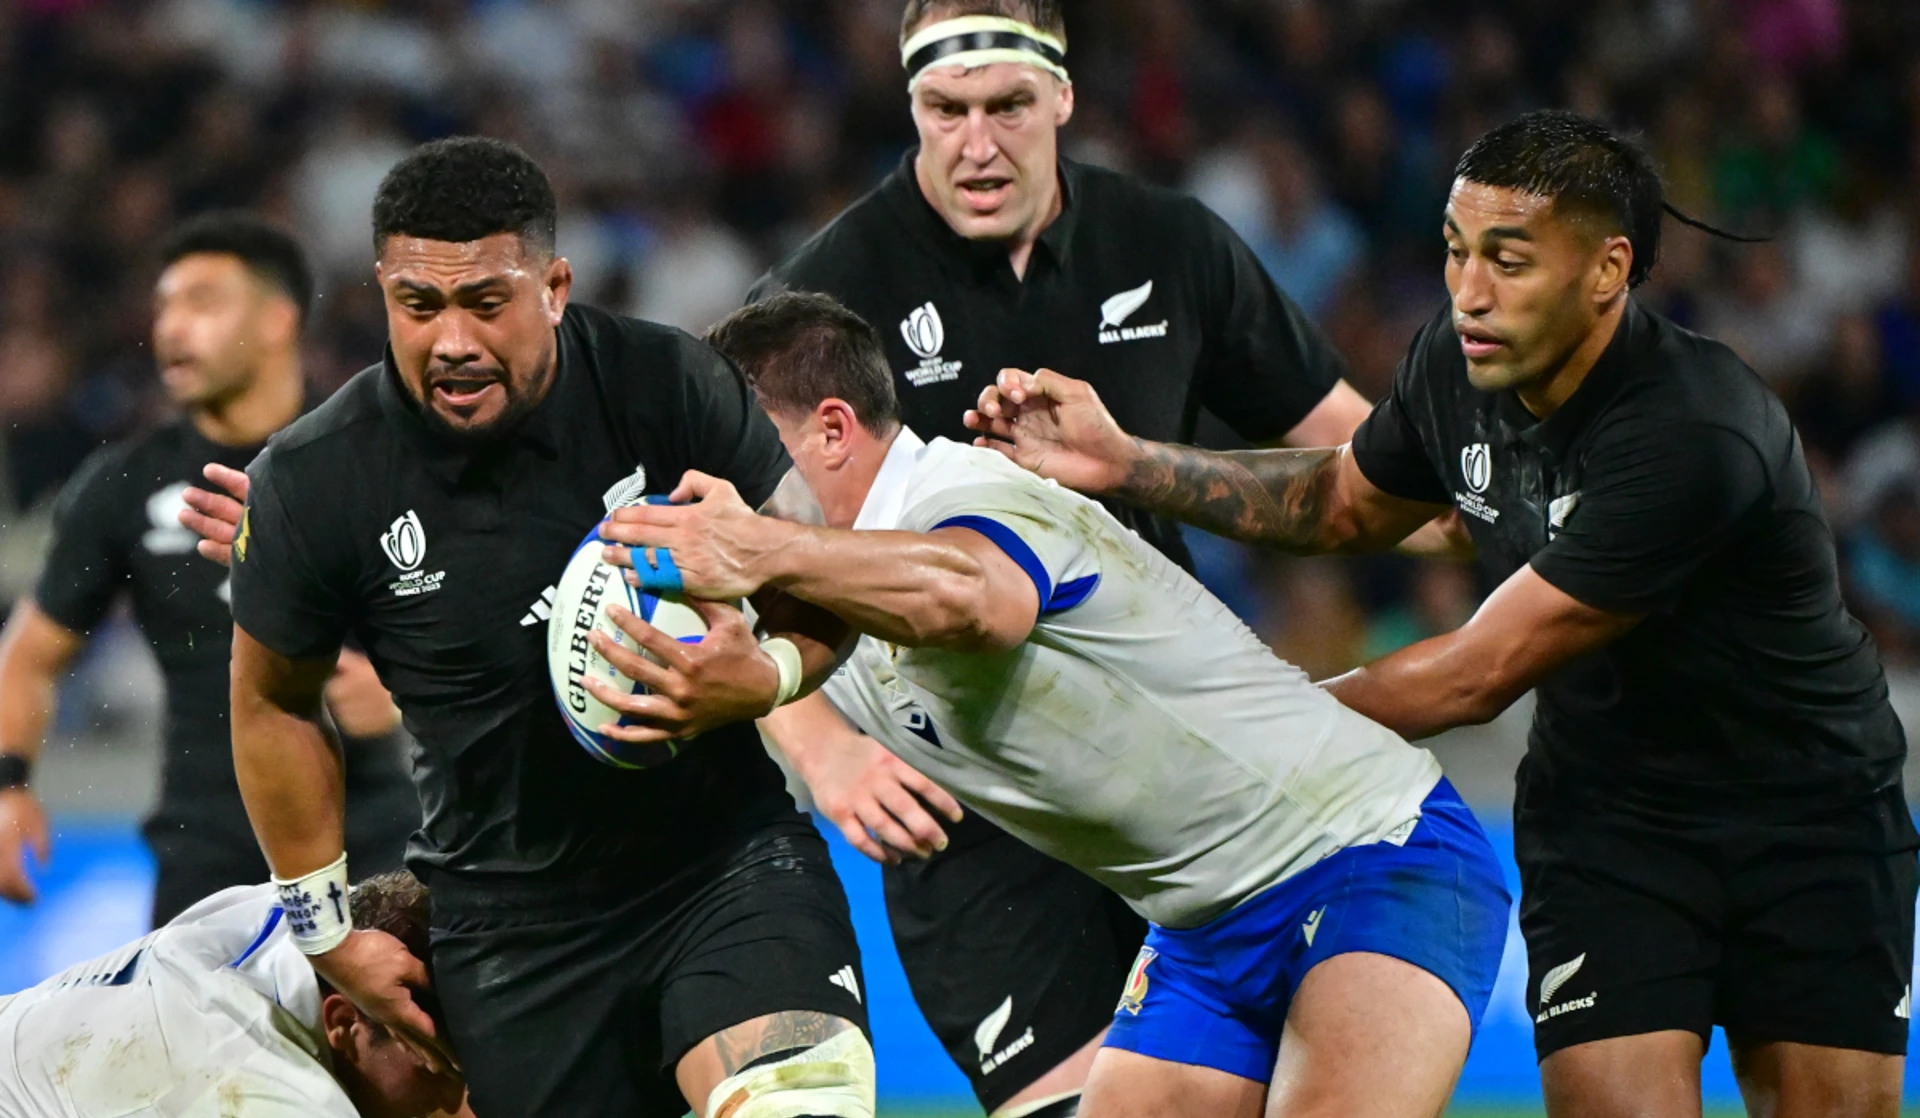 All Blacks could hit England with power rugby, predicts Chiefs boss